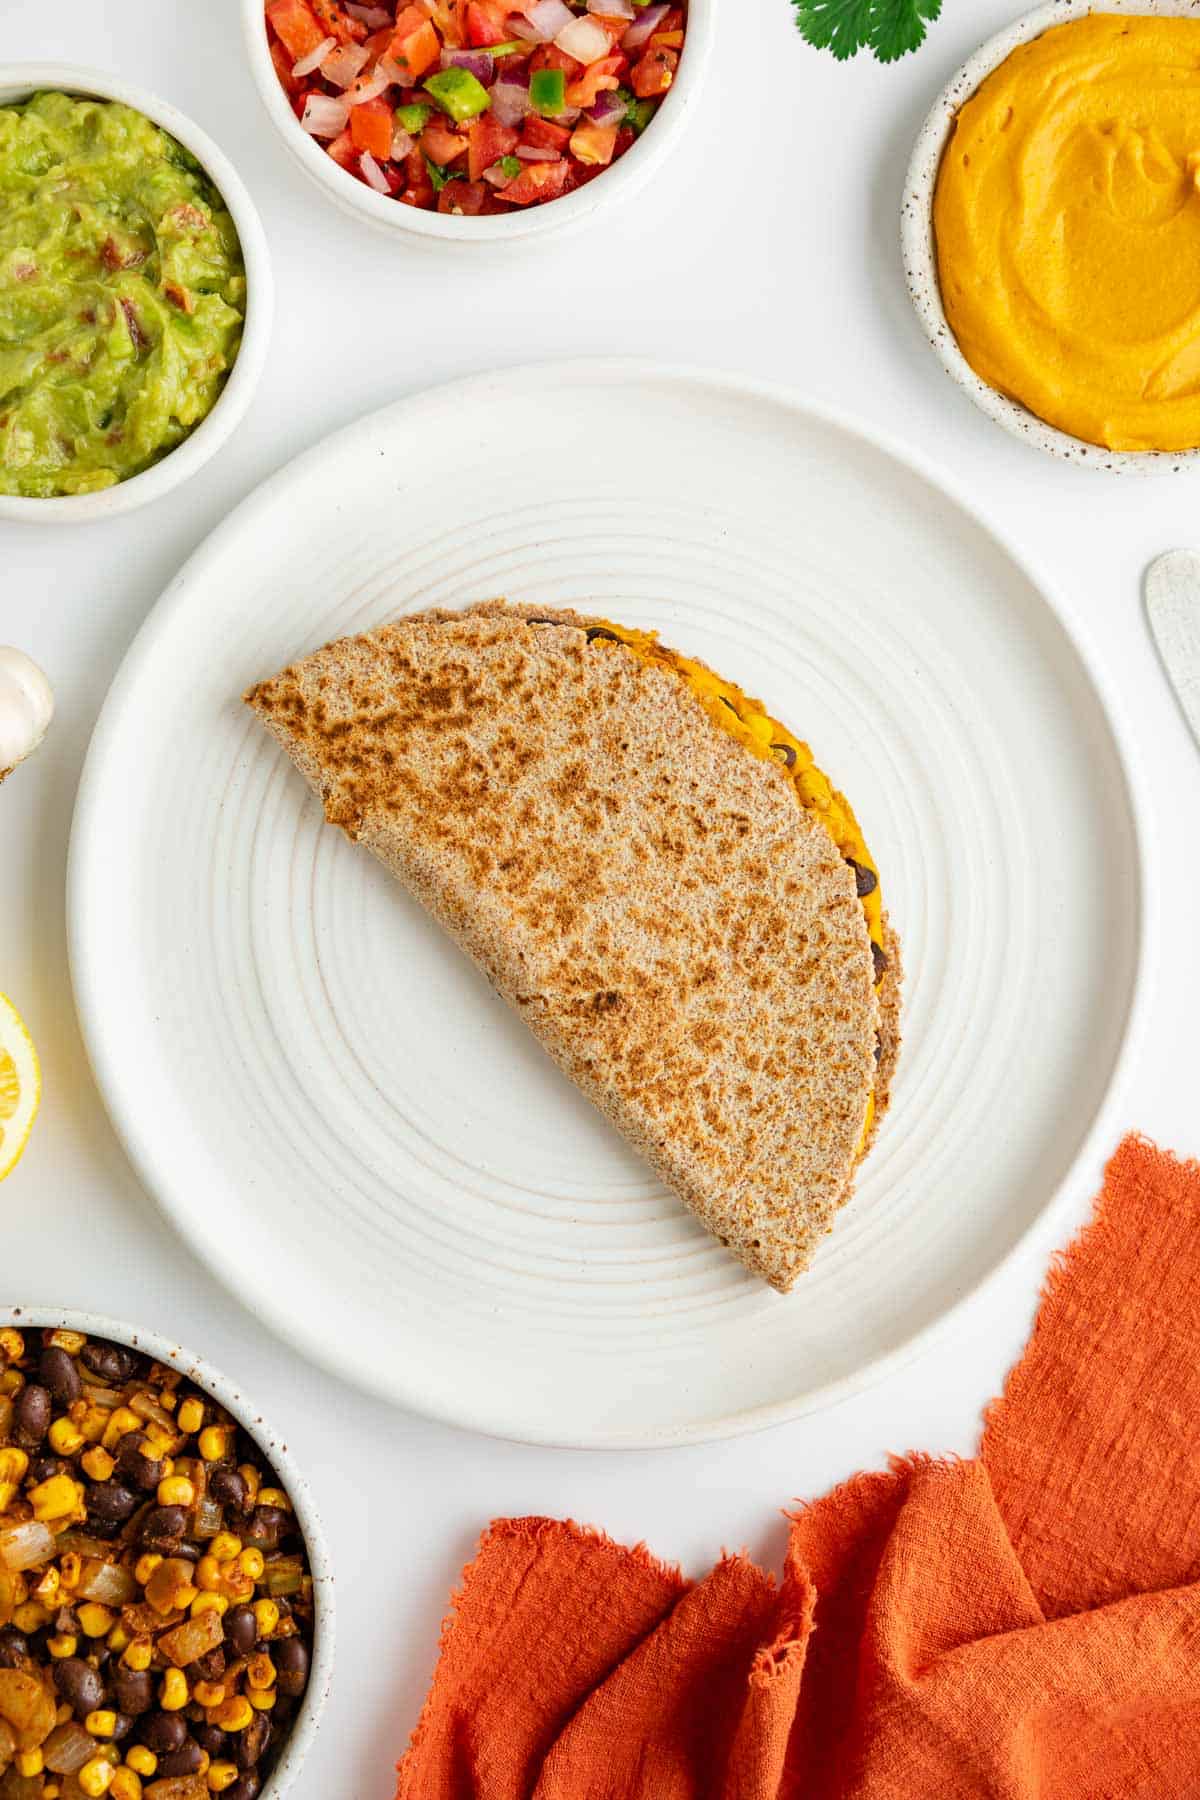 a grilled quesadilla on a white plate surrounded by bowls of ingredients, including guacamole and pico de gallo